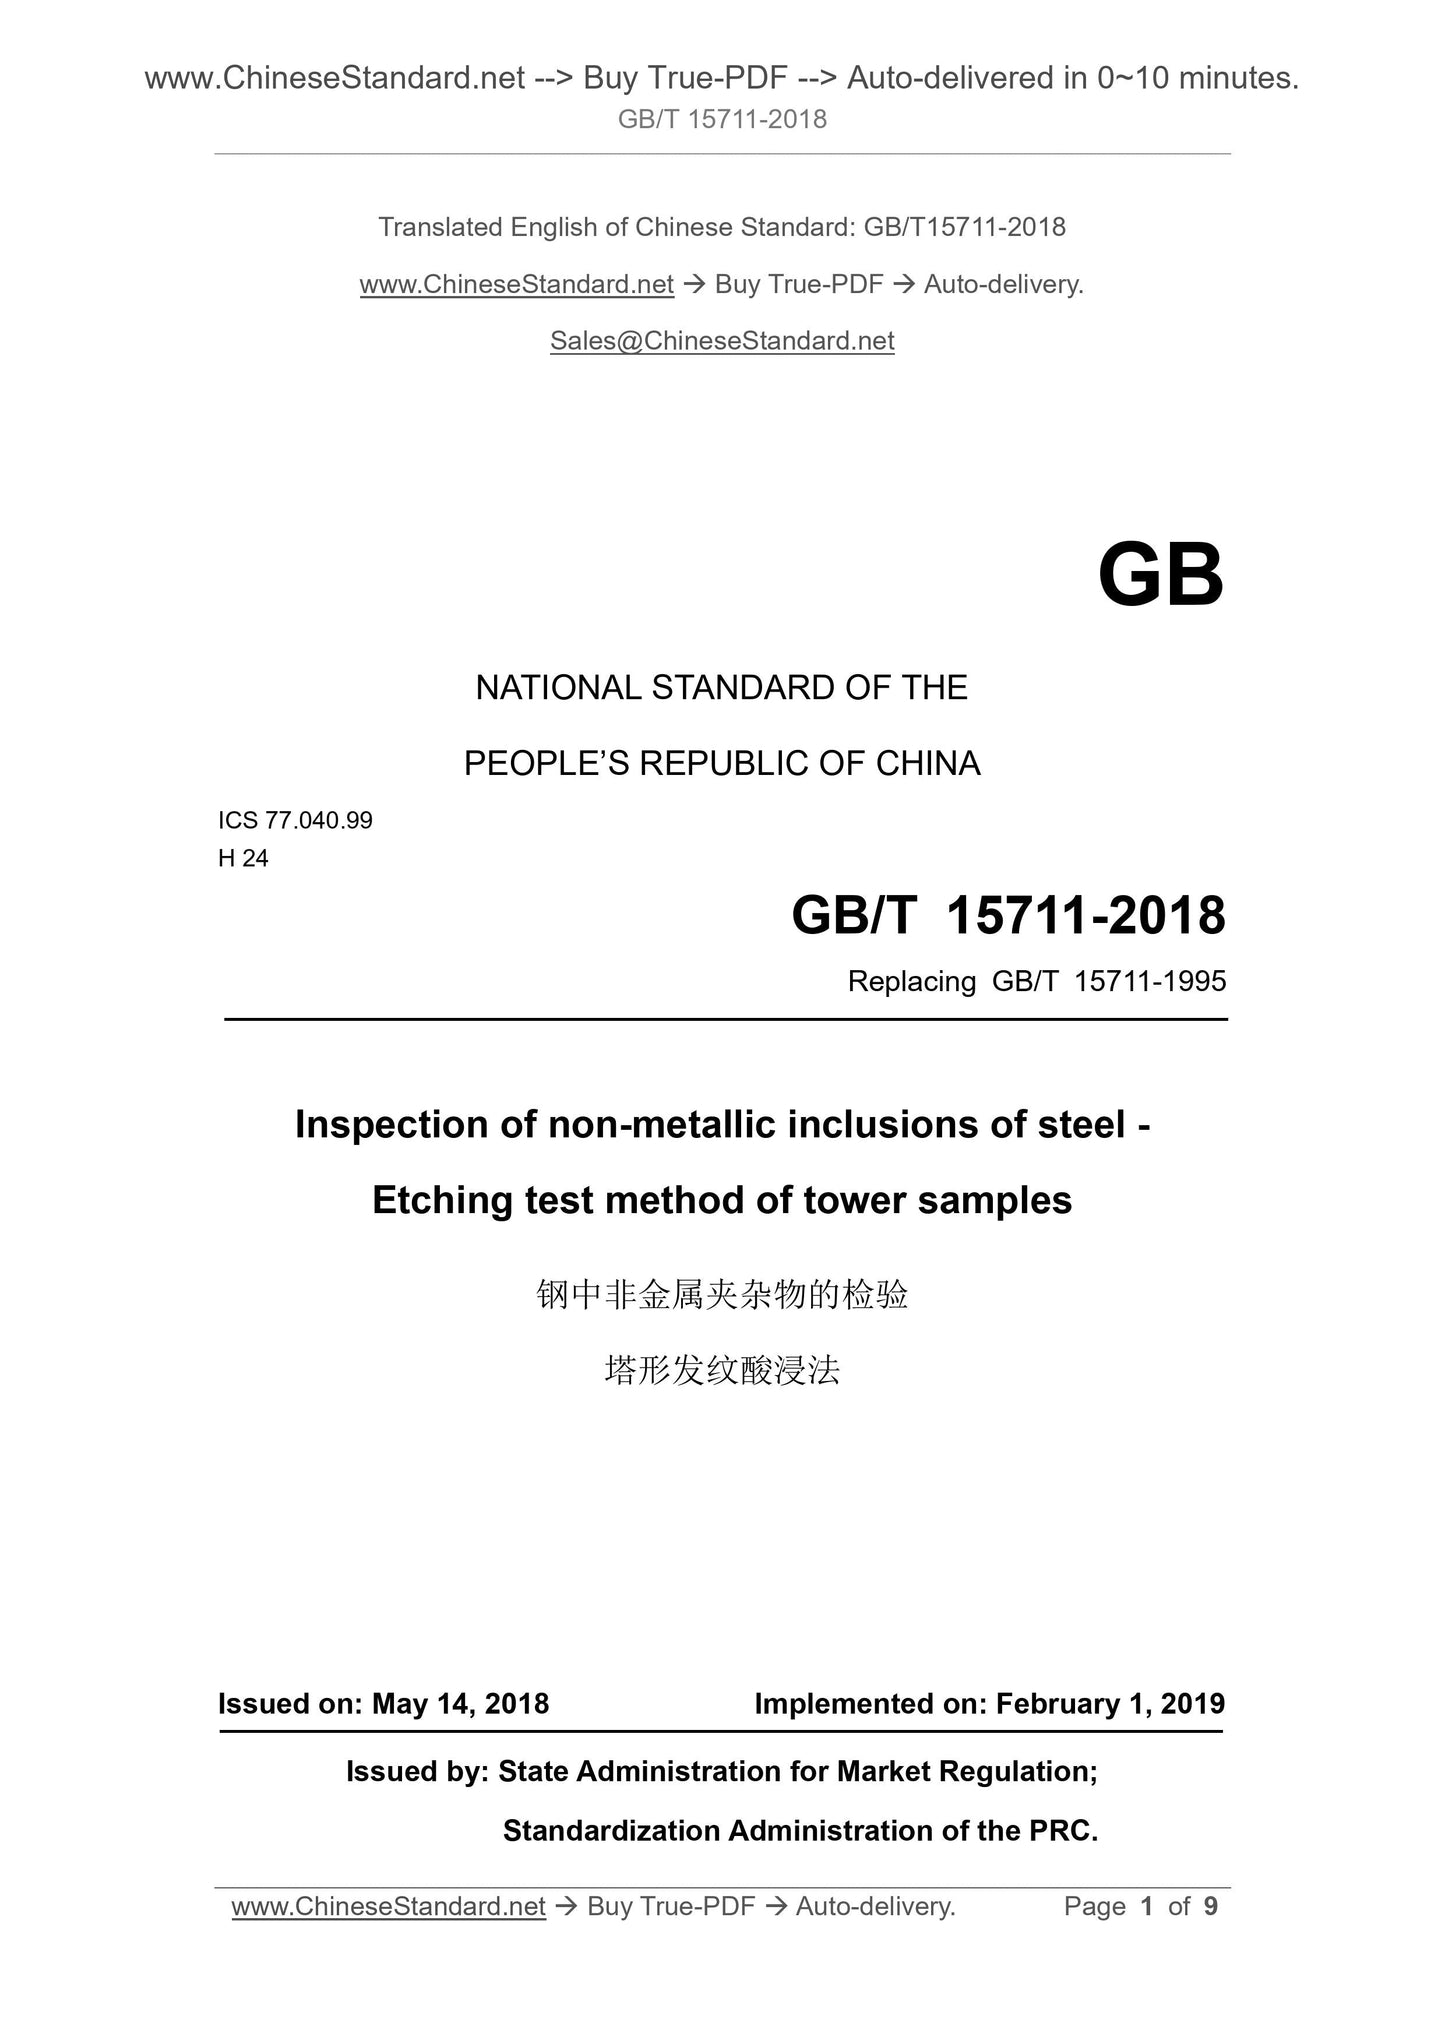 GB/T 15711-2018 Page 1